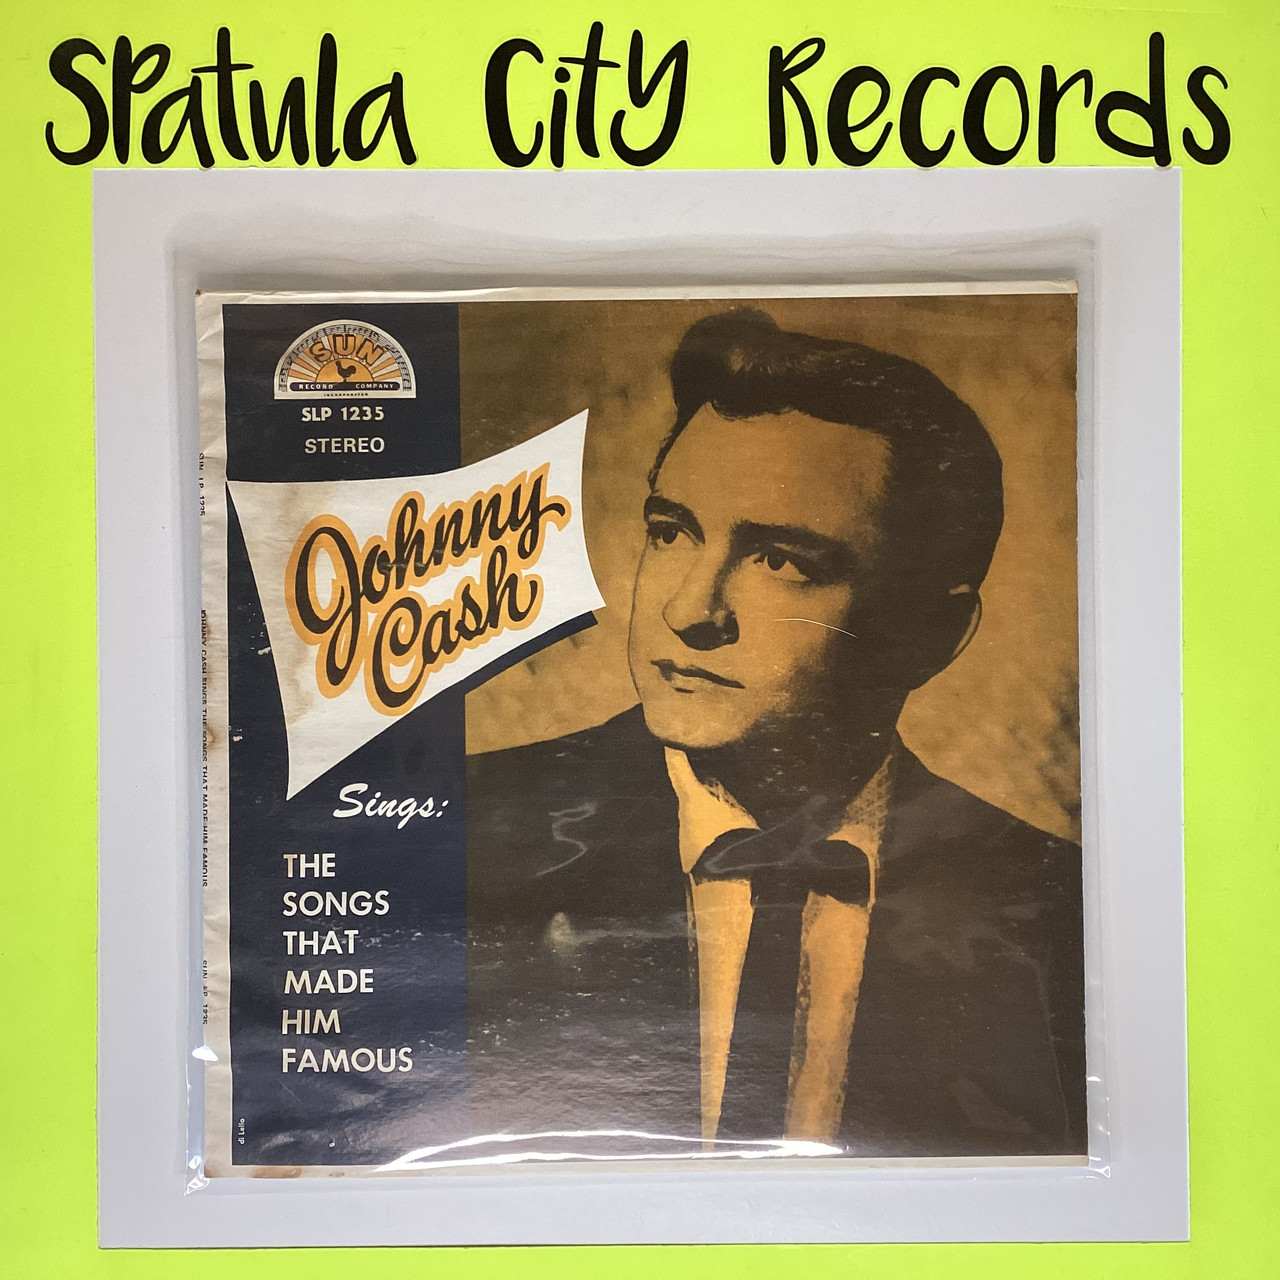 Johnny Cash - Sings the Songs That Made Him Famous - vinyl record album LP